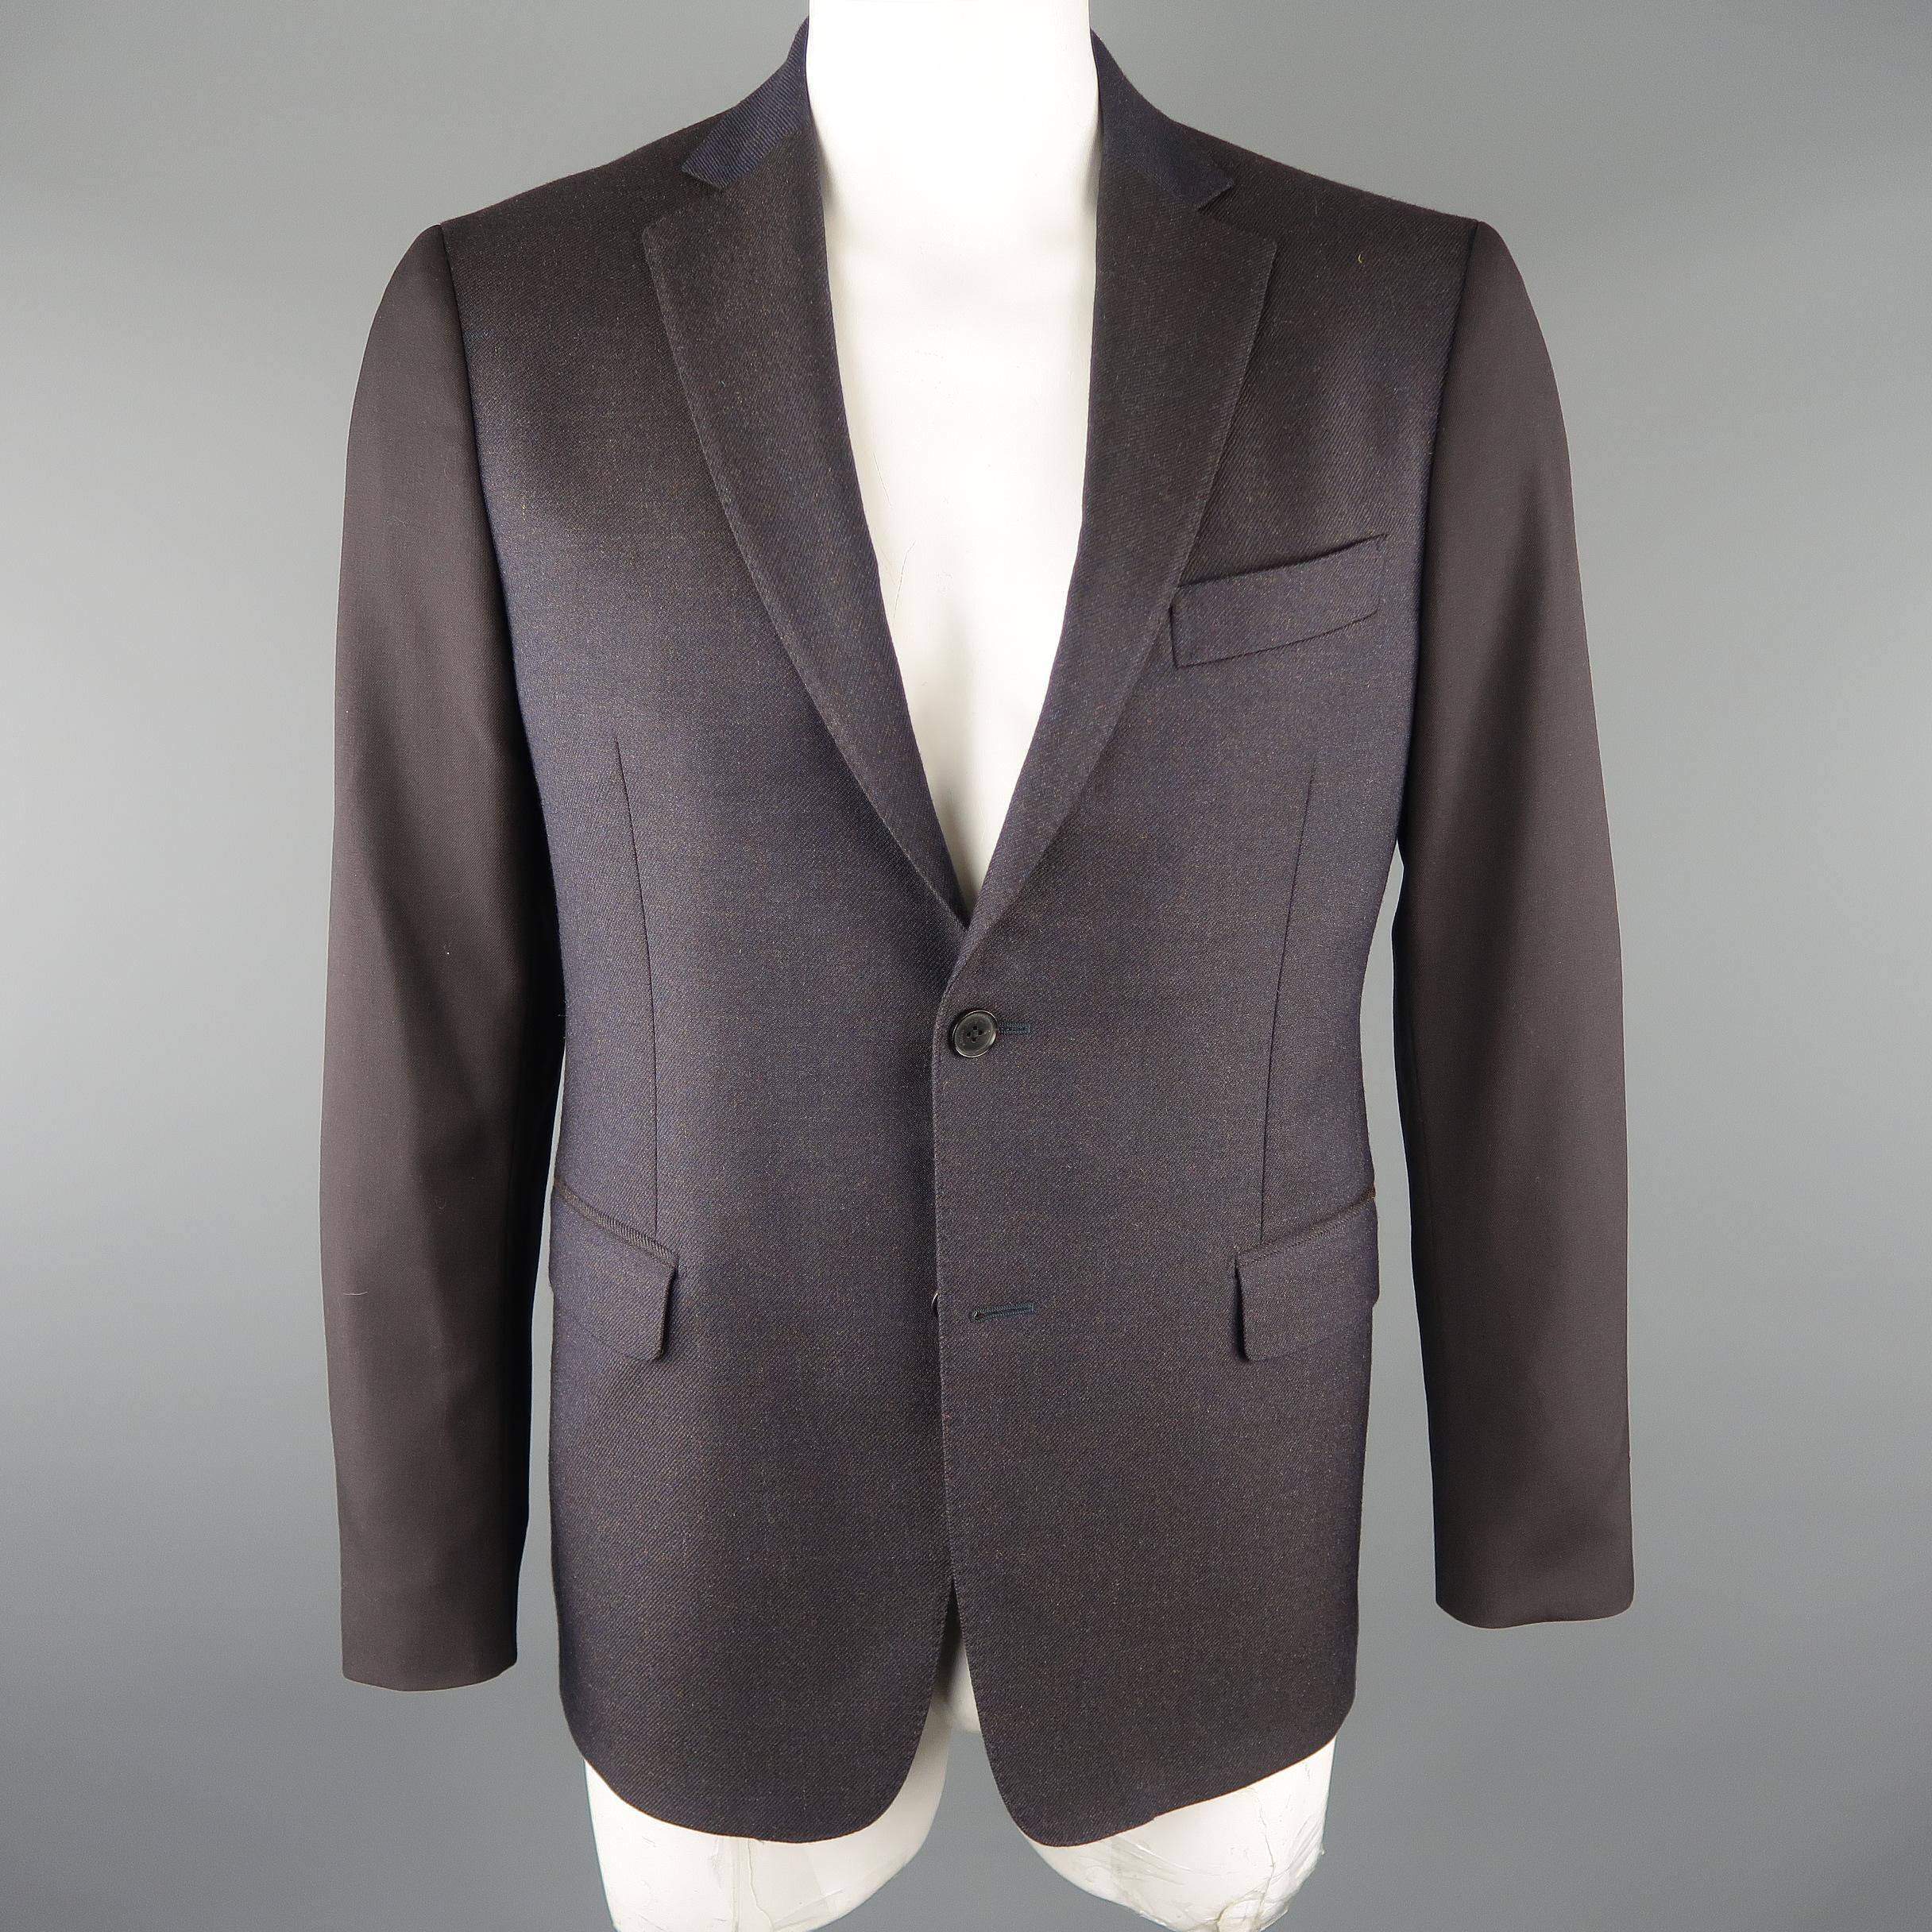 SALVATORE FERRAGAMO sport coat come in navy and black tones, mixed fabrics, in wool and mohair materials, with notch lapel, slit pockets, two buttons closure, single breasted. Made in Italy.
 
Excellent Pre-Owned Condition.
Marked: 52 IT.
